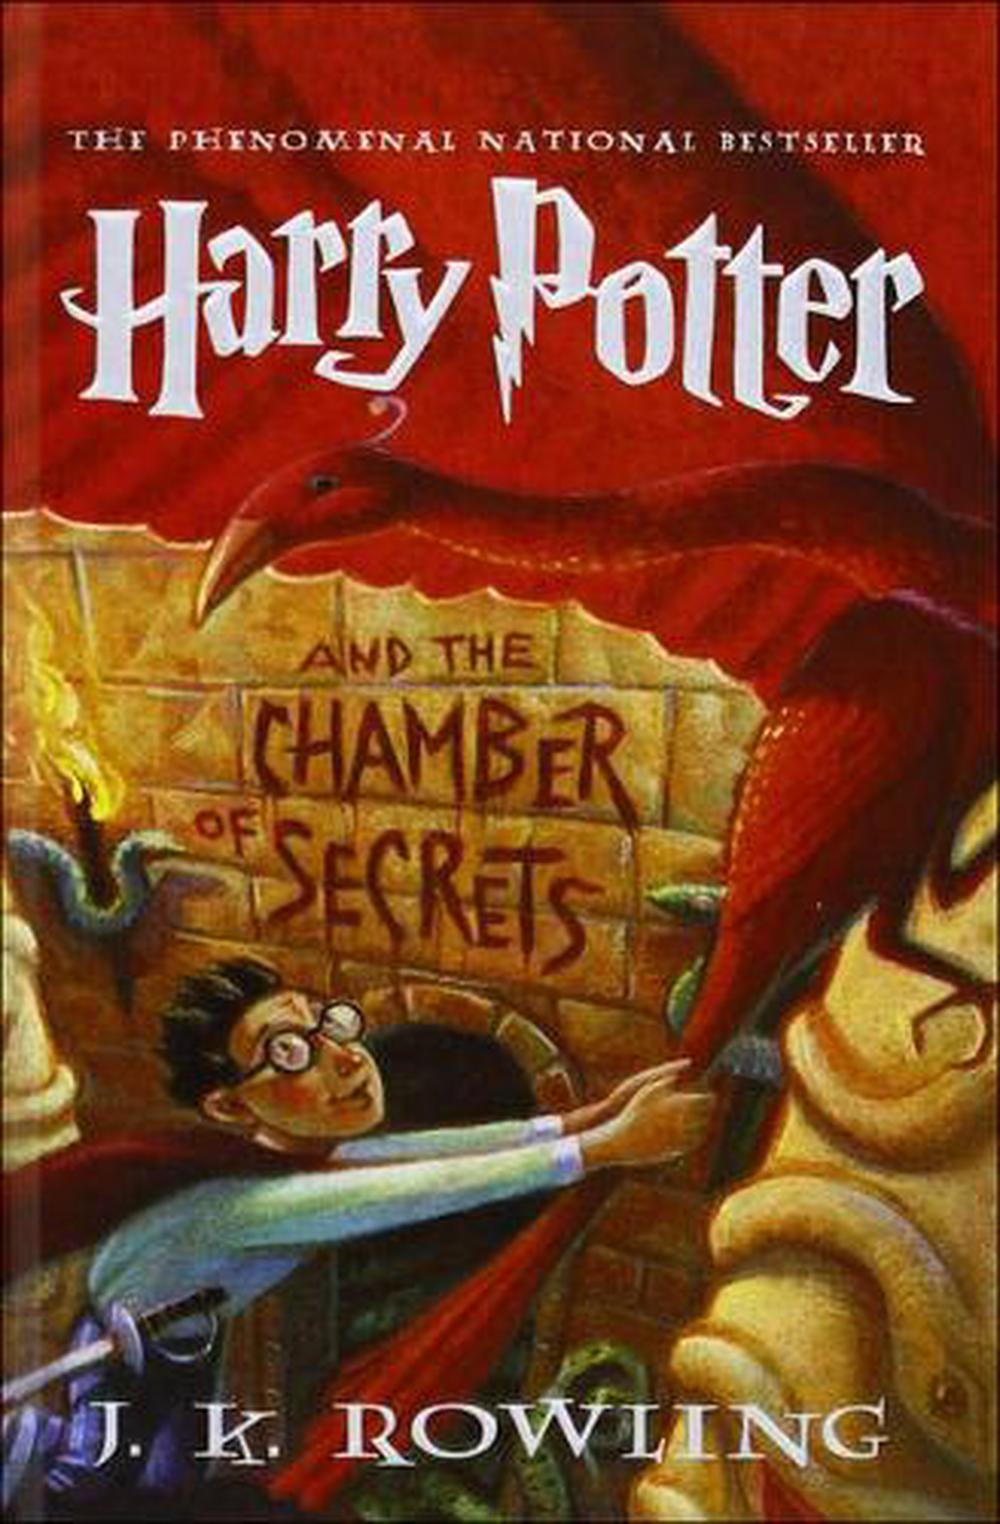 Harry Potter and the Chamber of Secrets by J.K. Rowling (English